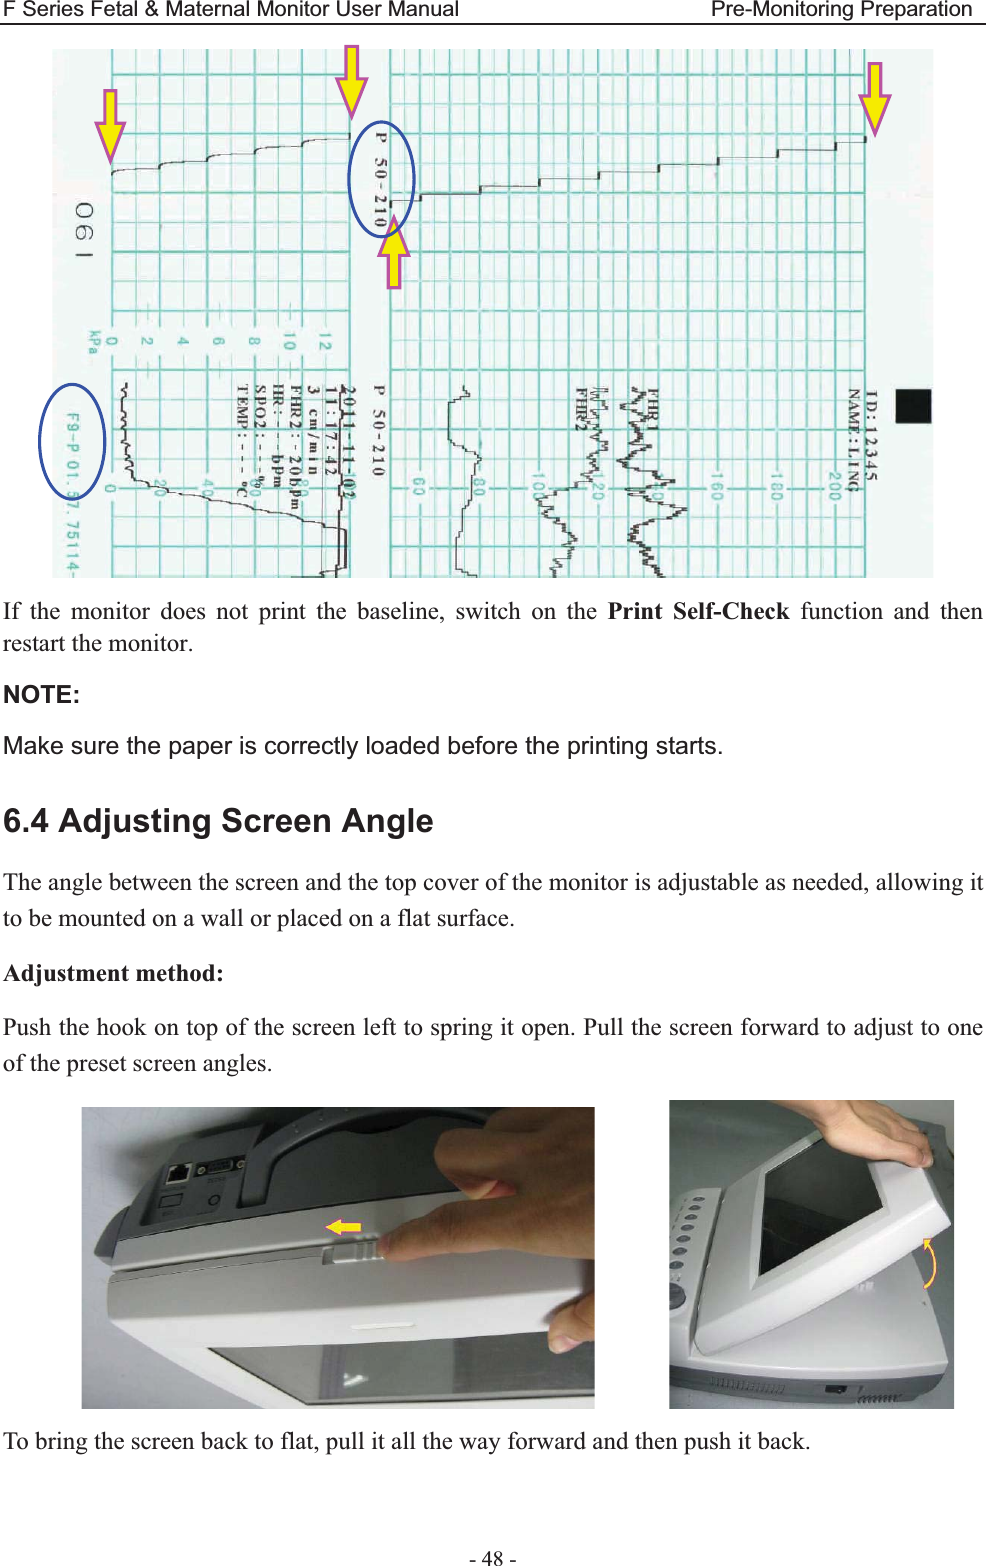 F Series Fetal &amp; Maternal Monitor User Manual                       Pre-Monitoring Preparation - 48 -  If the monitor does not print the baseline, switch on the Print Self-Check function and then restart the monitor. NOTE:Make sure the paper is correctly loaded before the printing starts. 6.4 Adjusting Screen Angle The angle between the screen and the top cover of the monitor is adjustable as needed, allowing it to be mounted on a wall or placed on a flat surface. Adjustment method: Push the hook on top of the screen left to spring it open. Pull the screen forward to adjust to one of the preset screen angles.         To bring the screen back to flat, pull it all the way forward and then push it back. 